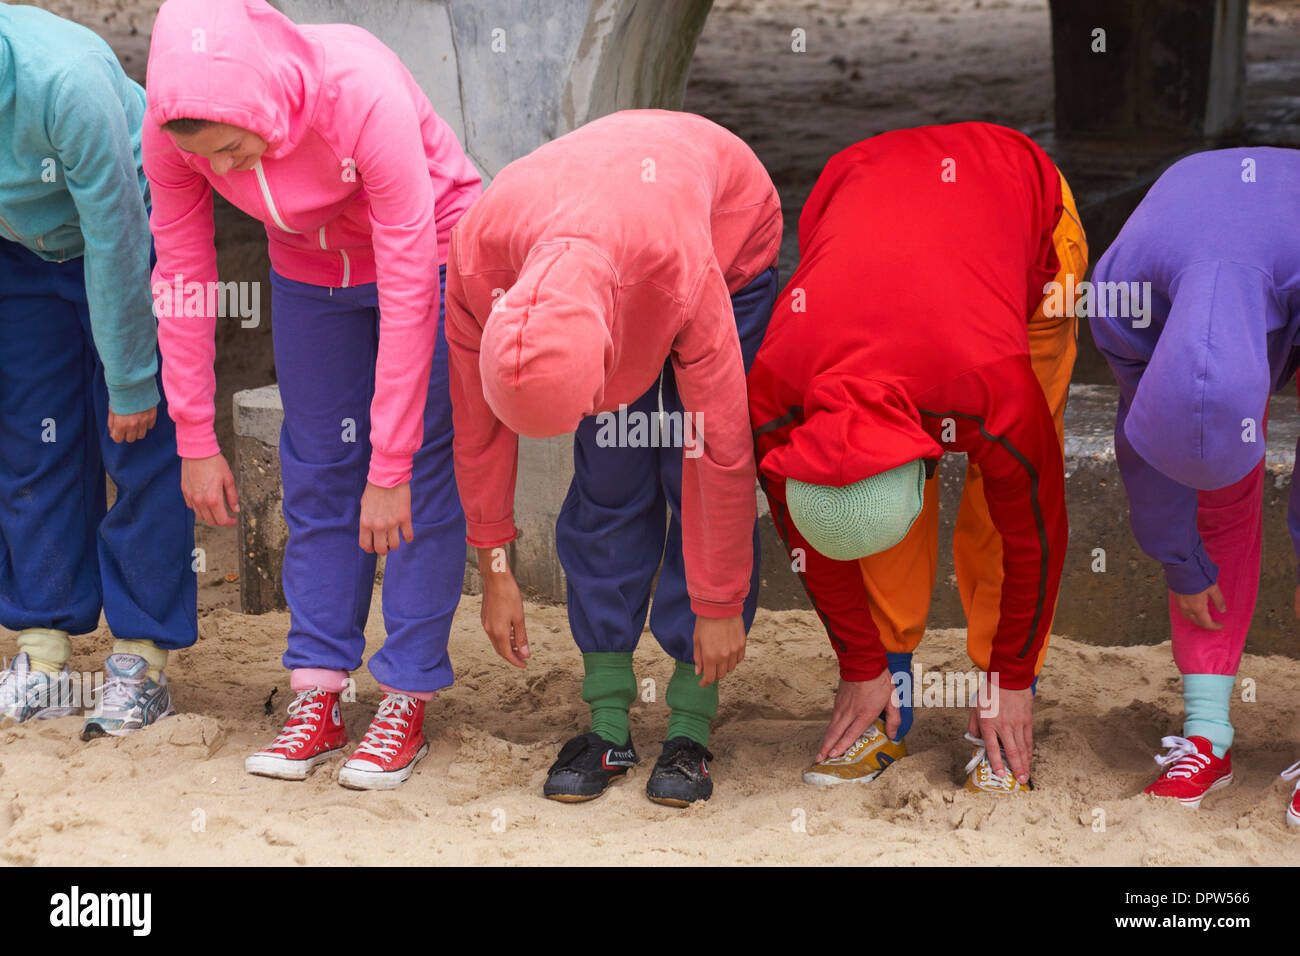 Bodies in Urban Spaces performers in colourful hoodies give a bow at the end of their performance at Bournemouth, Dorset UK  in June Stock Photo